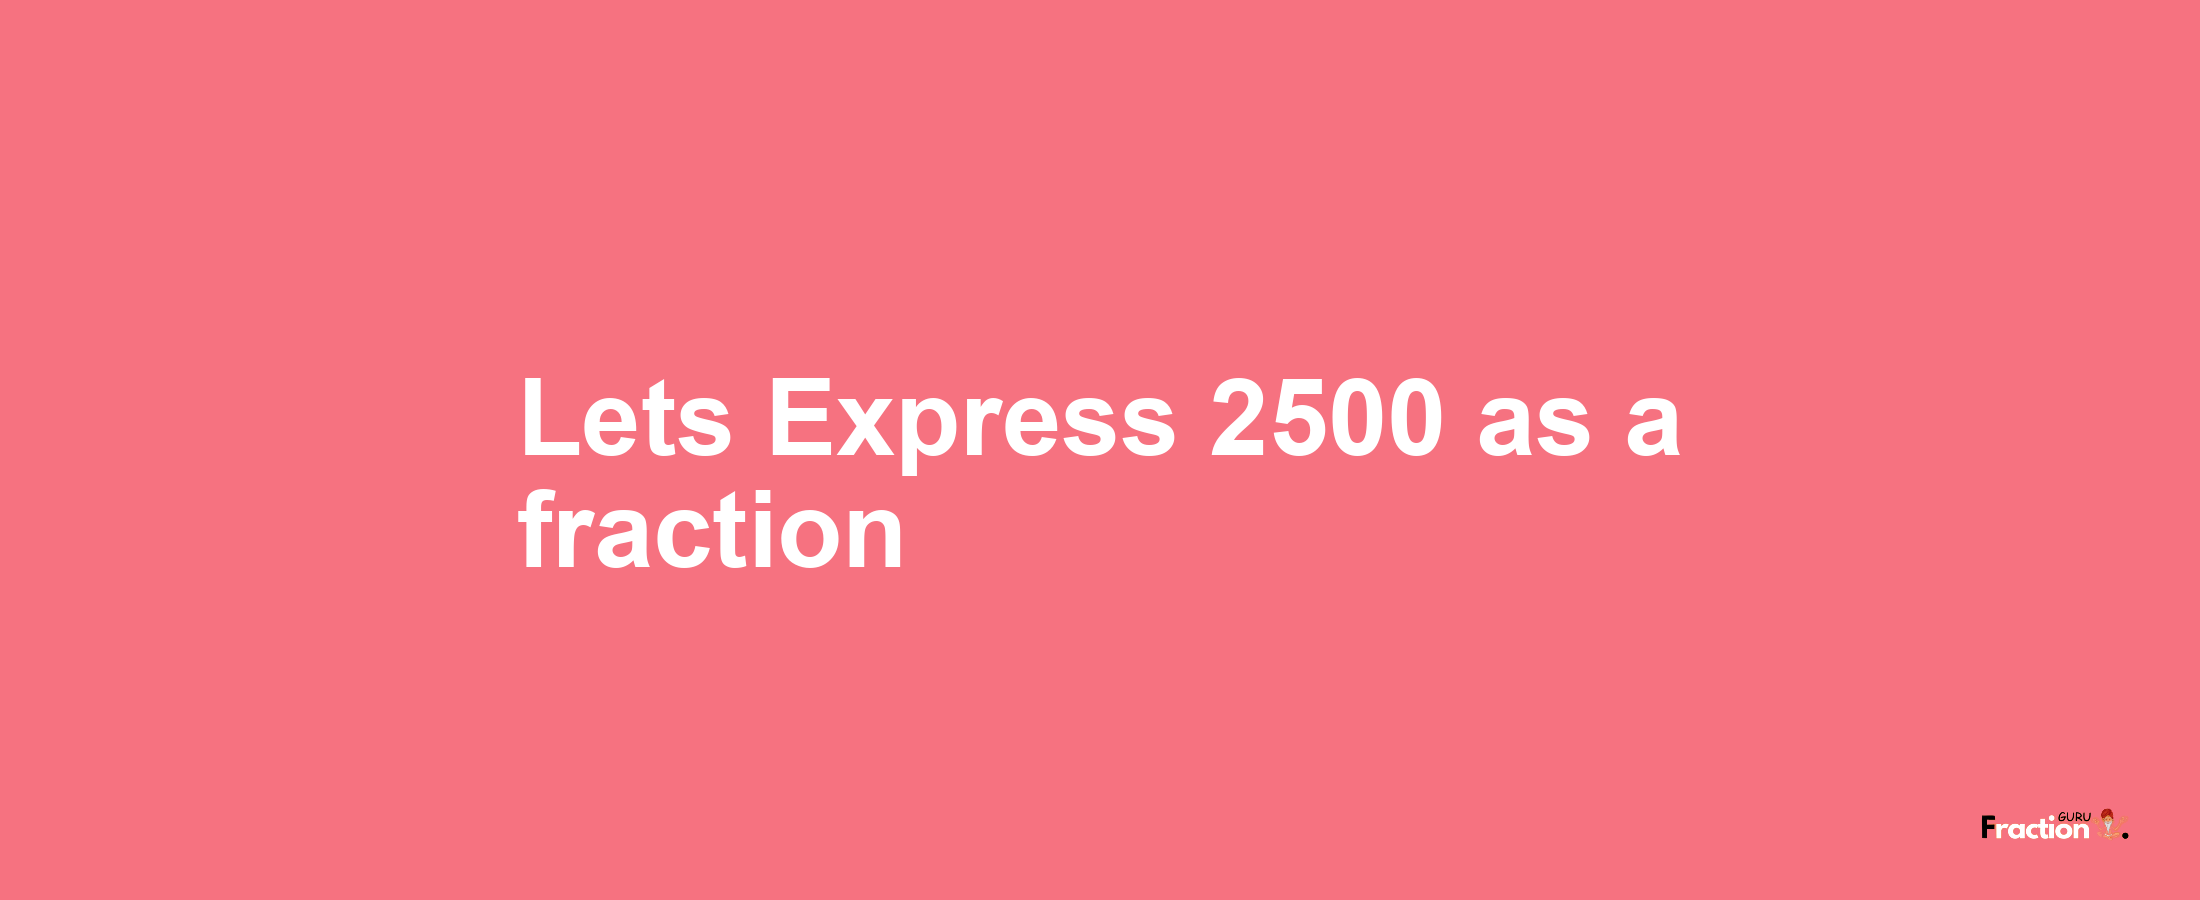 Lets Express 2500 as afraction